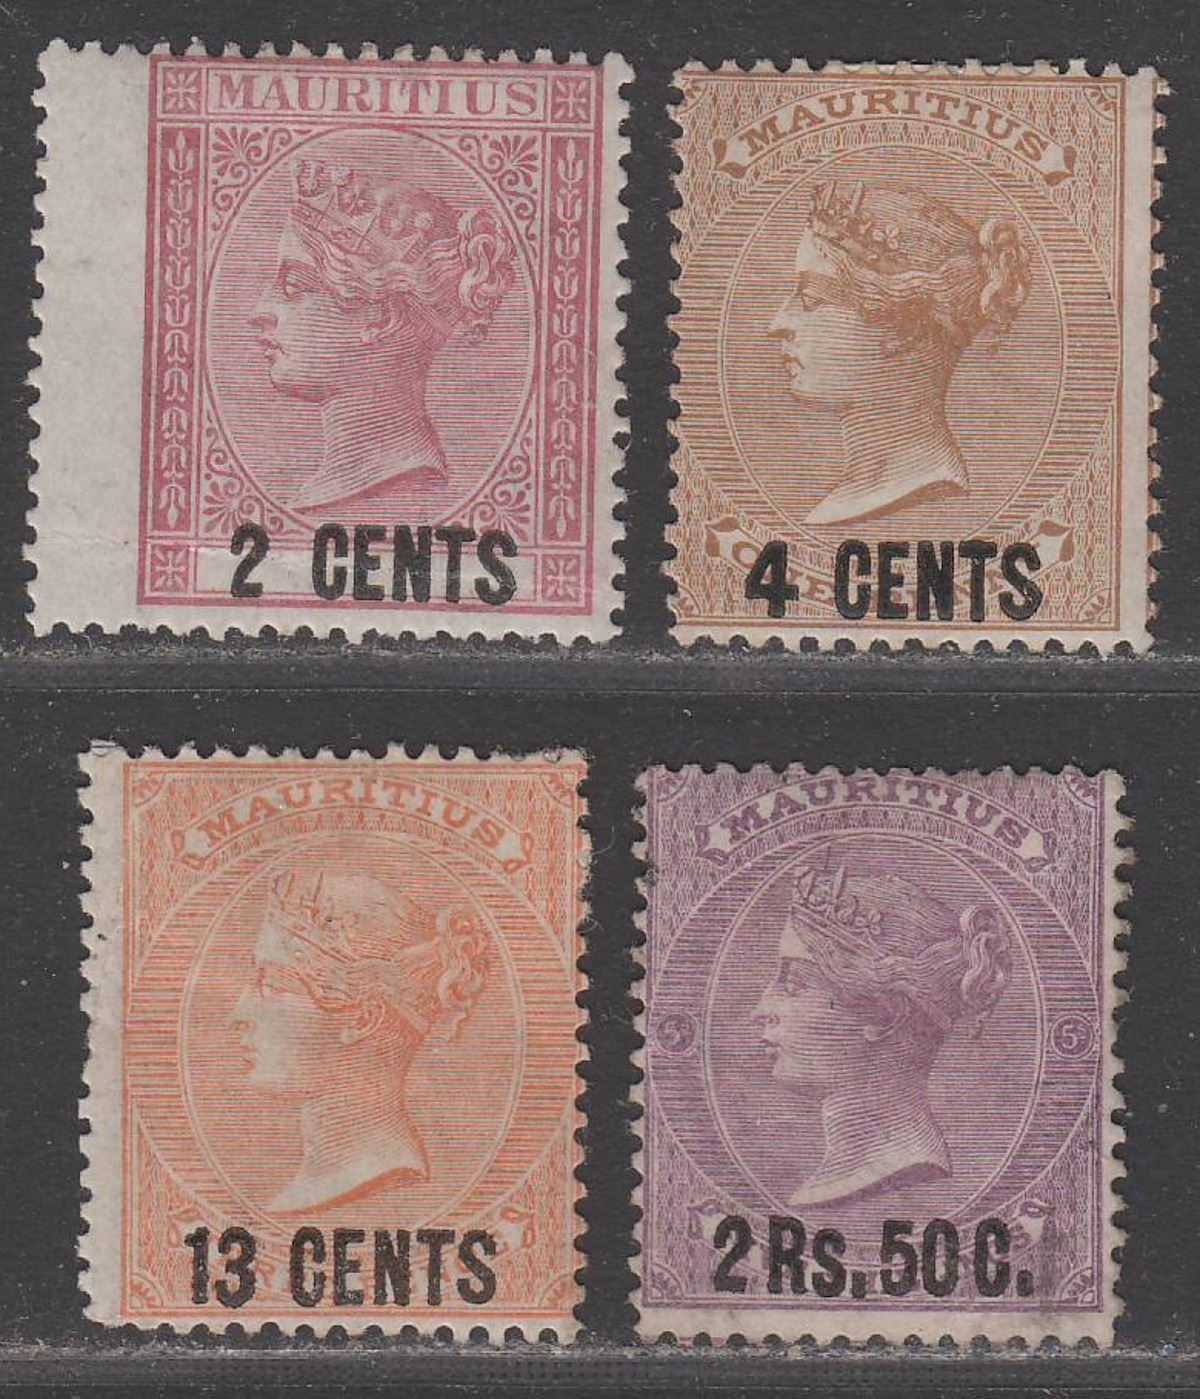 Mauritius 1878 Queen Victoria Surcharge Part Set to 2r.50 Mostly Mint